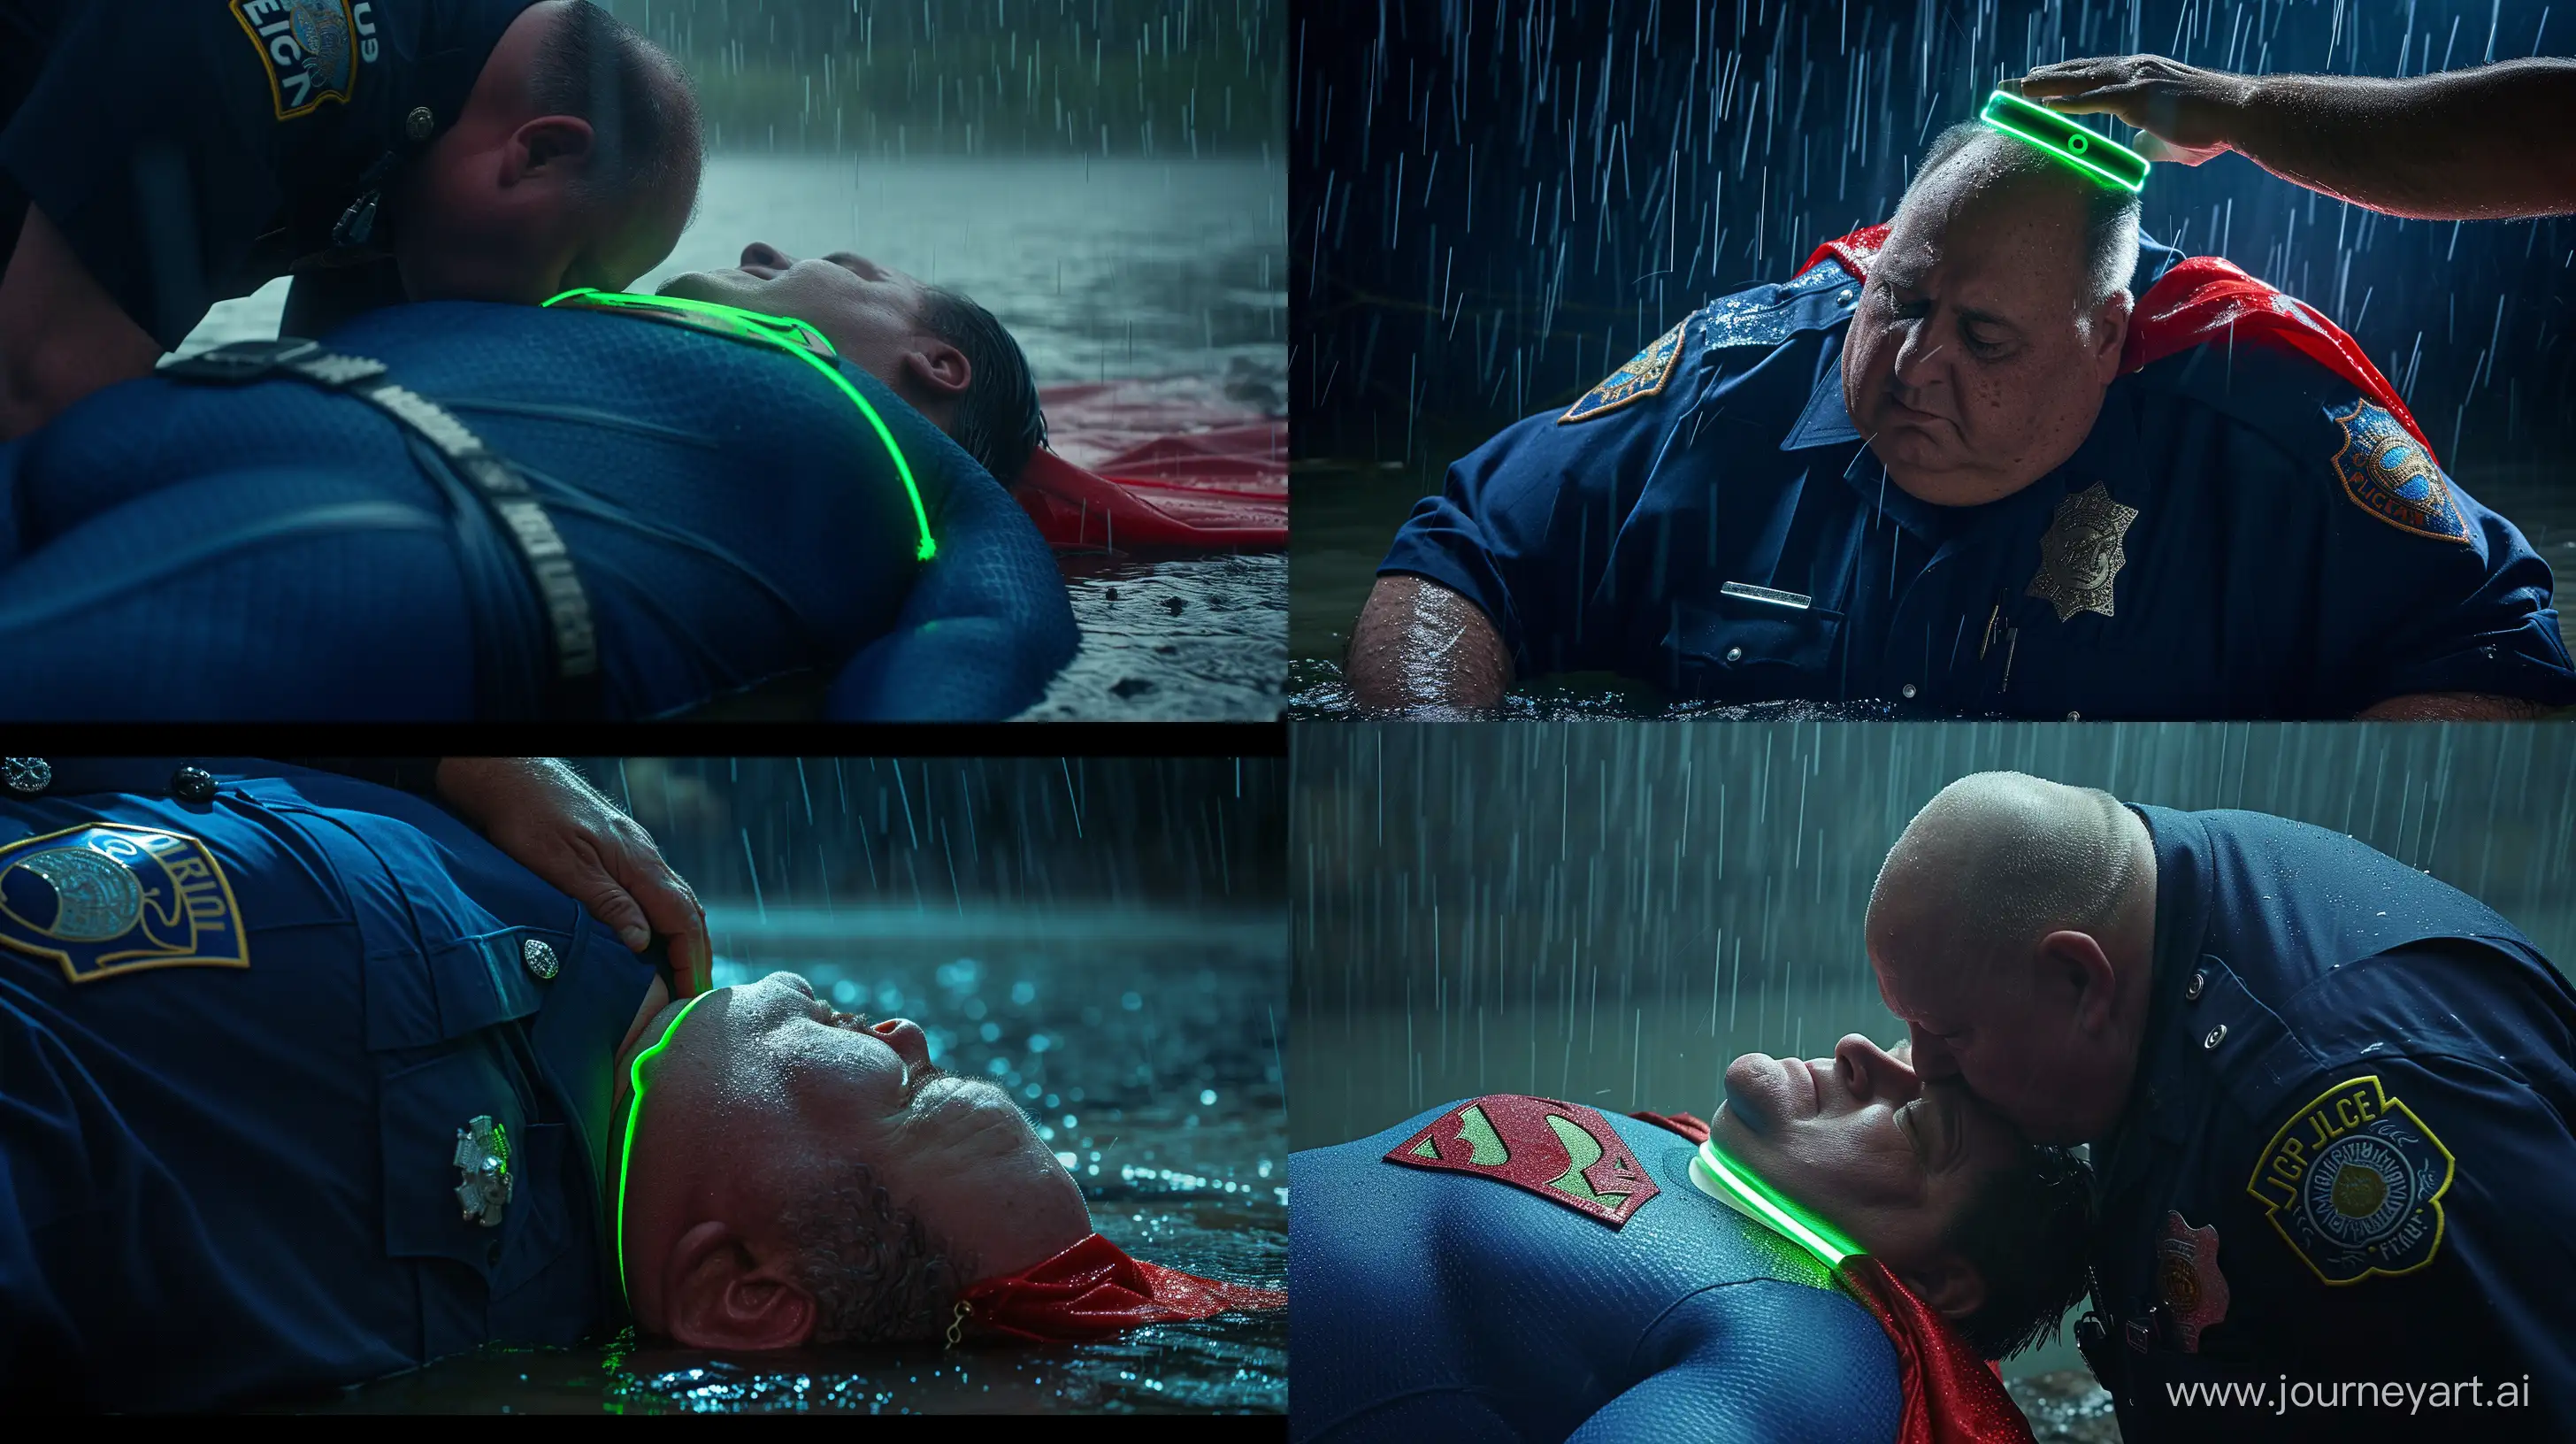 Senior-Officer-in-1978-Superman-Costume-Tightening-Neon-Dog-Collar-in-Rain-by-the-River